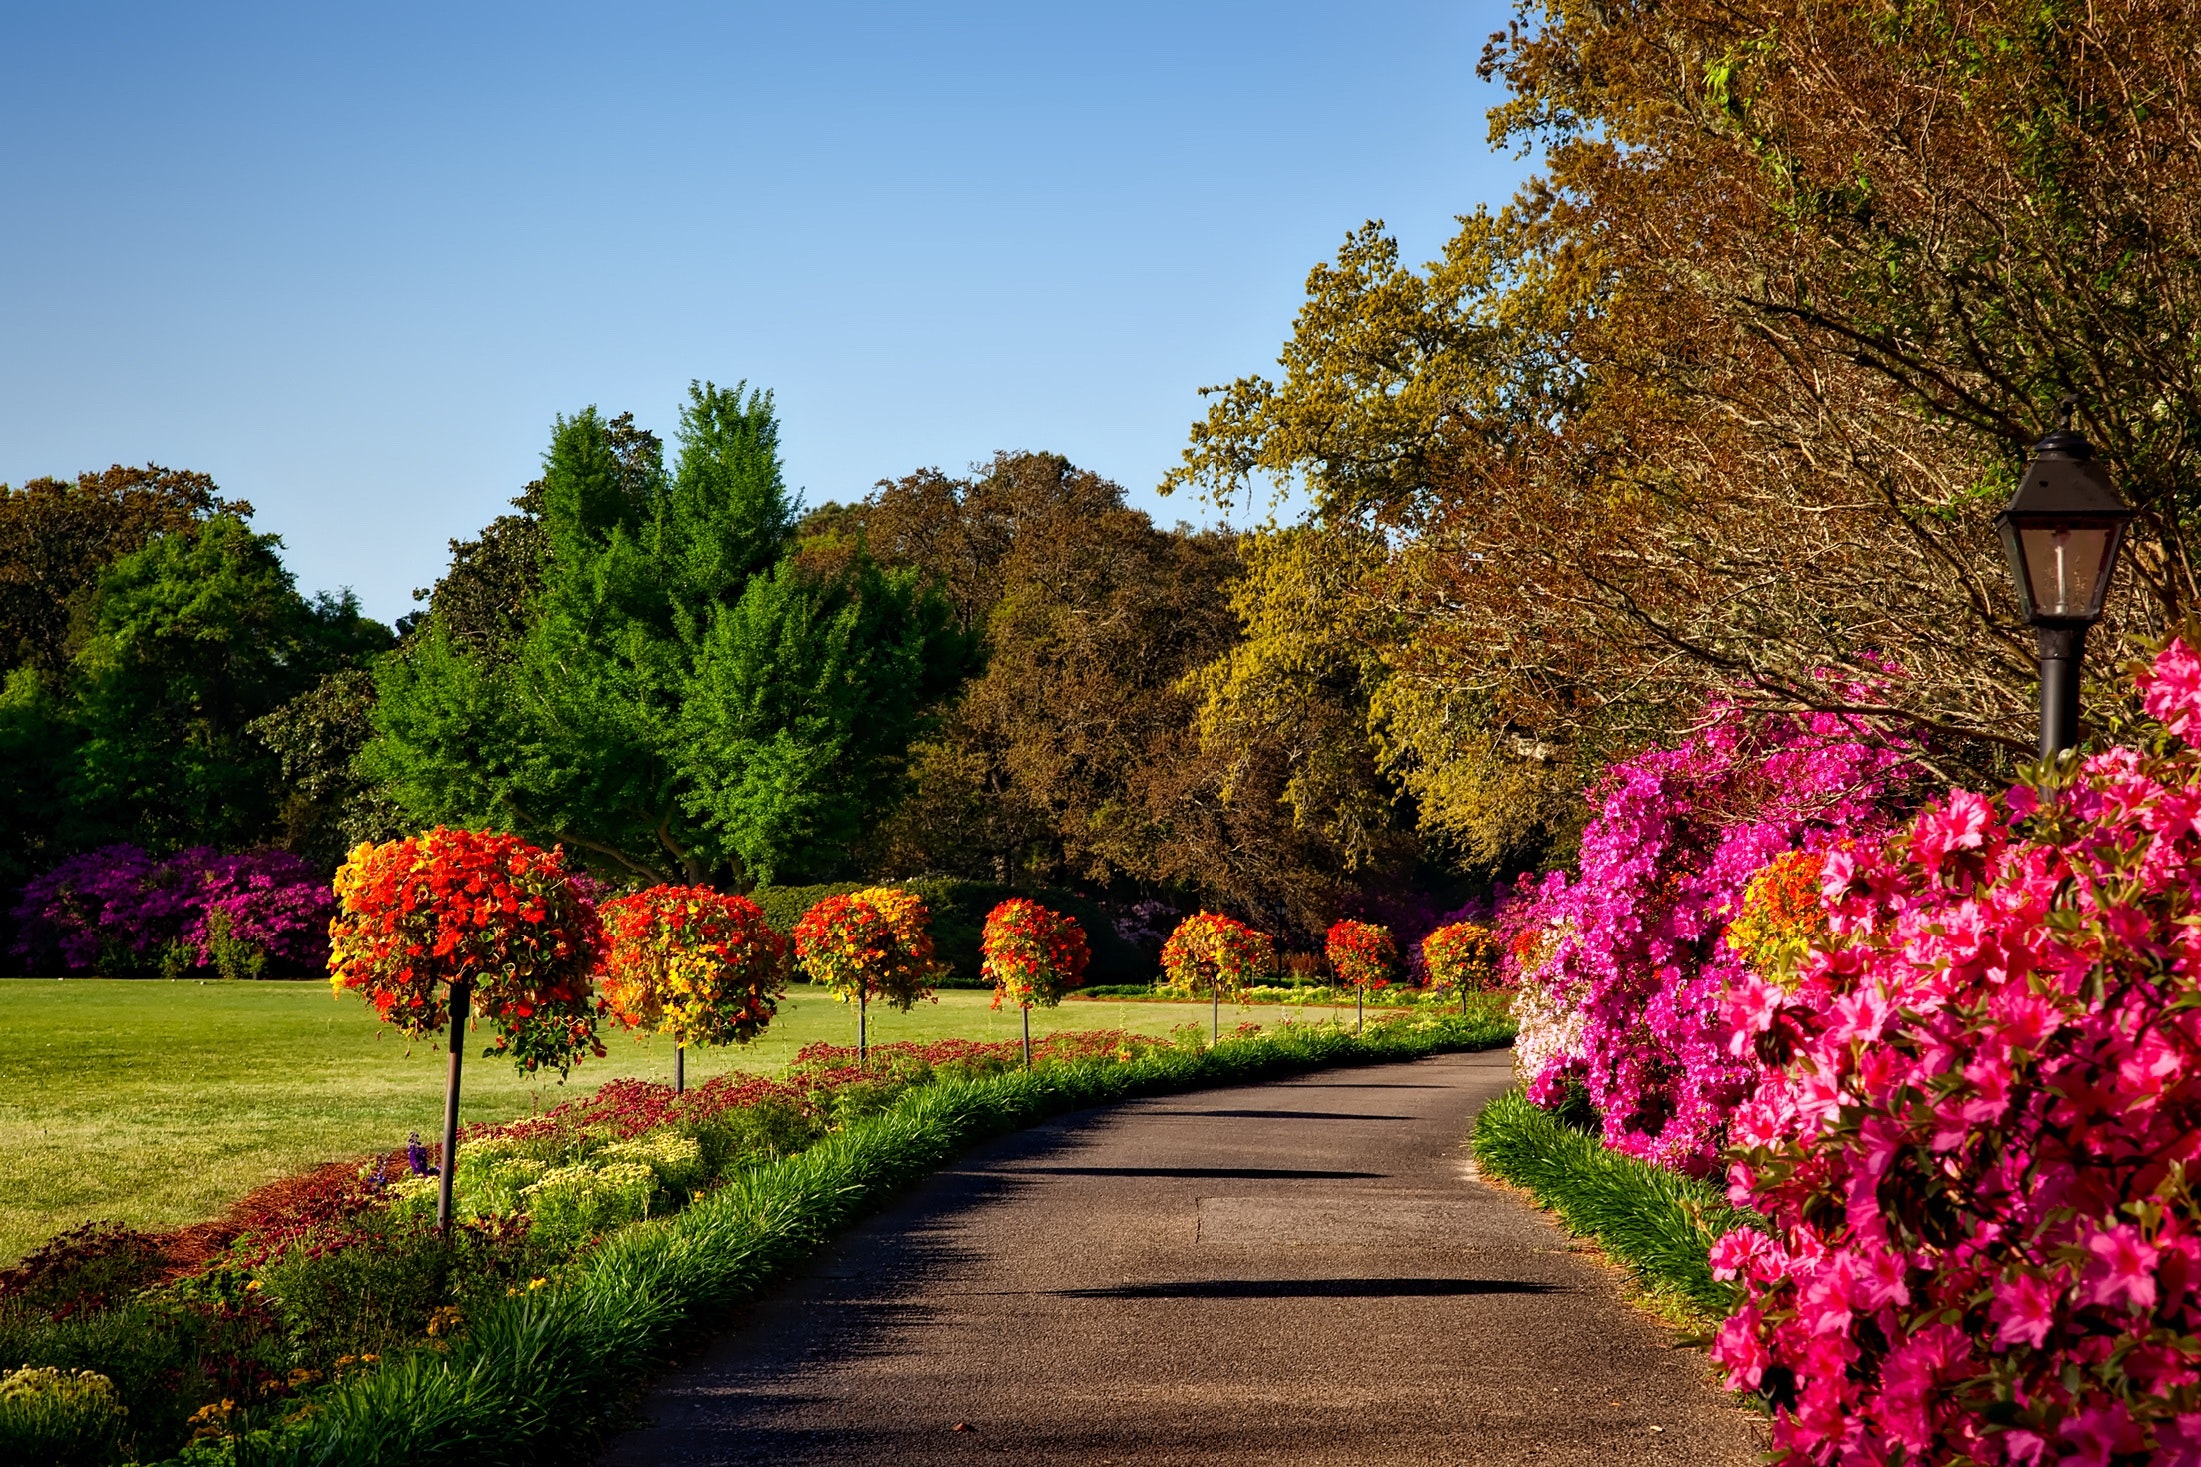 Paved walkway surrounded by trees, shrubs, and flowers